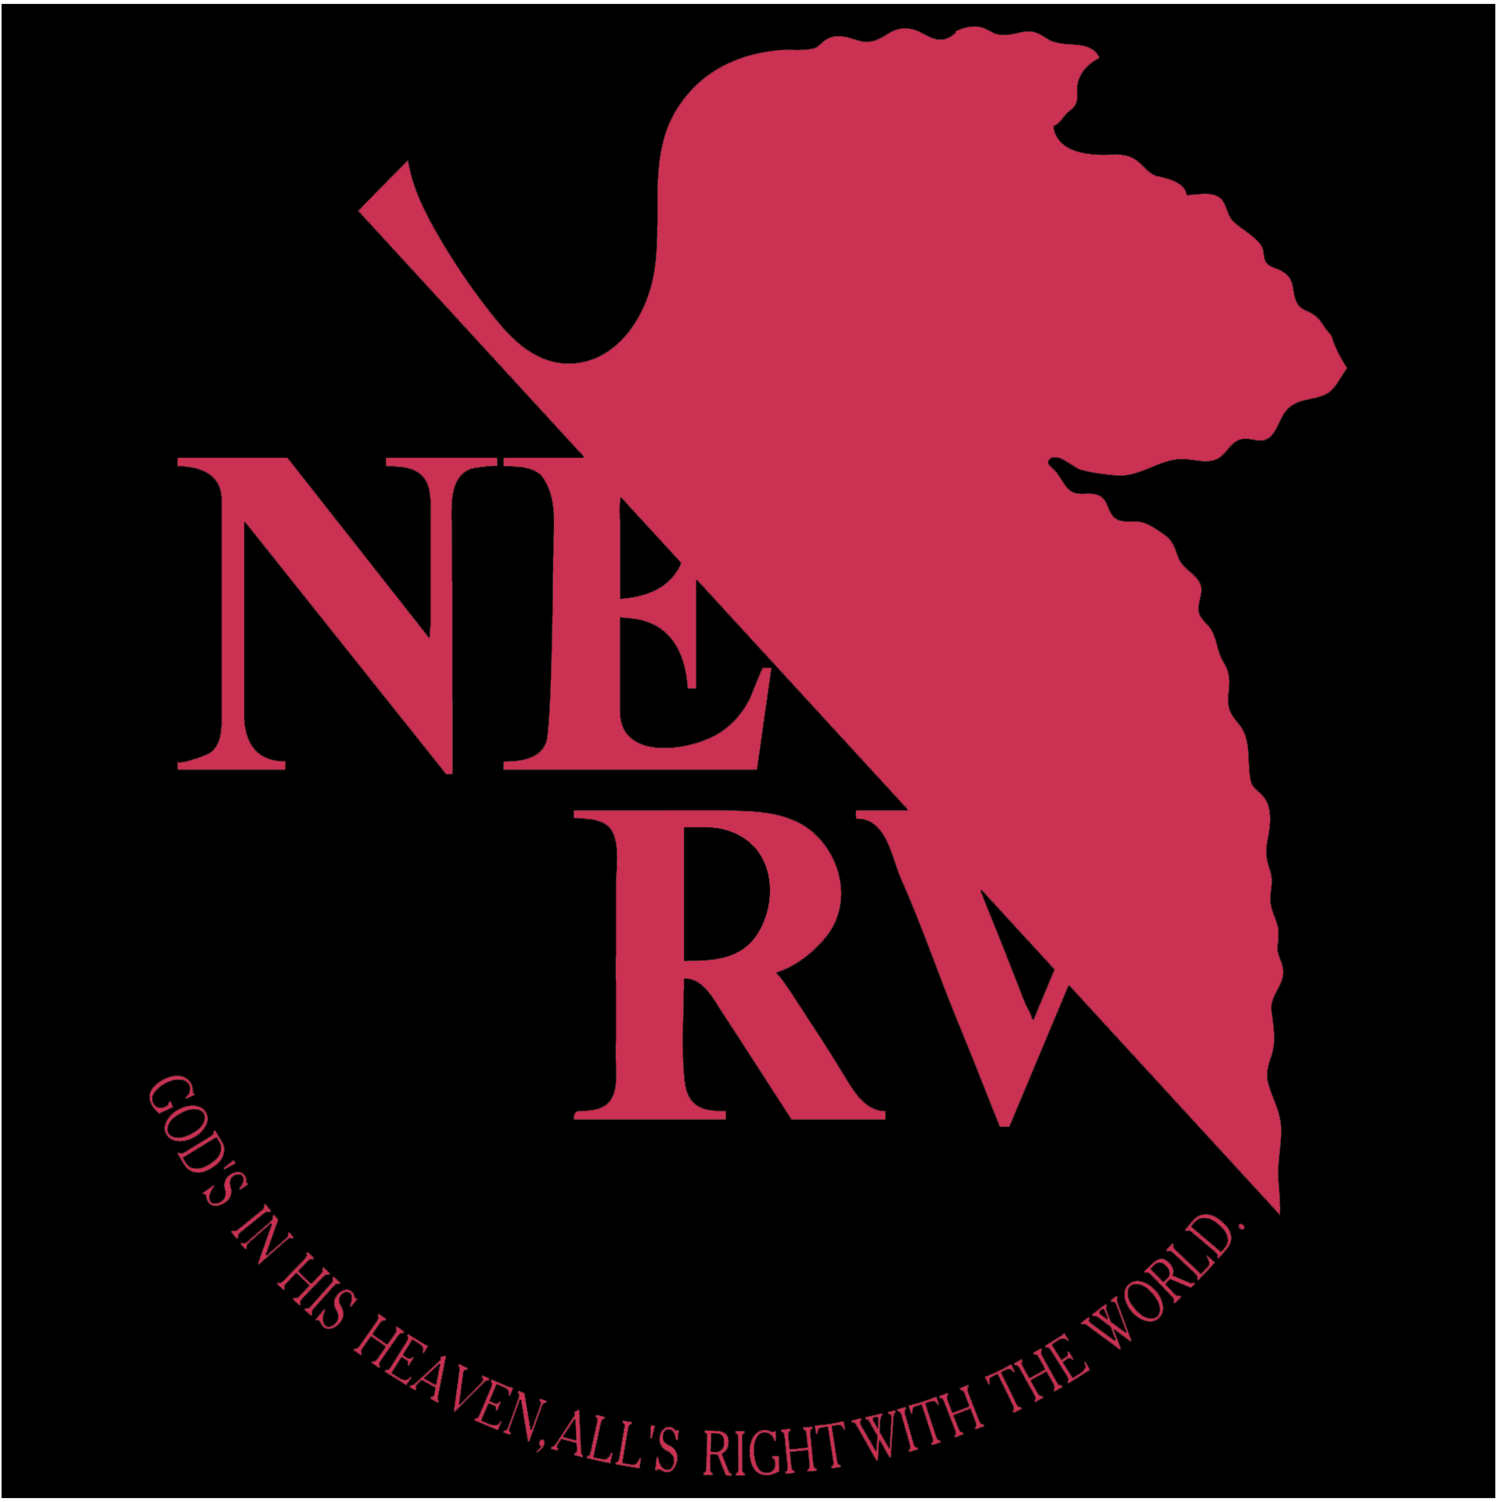 The anime series Neon Genesis Evangelion is iconic for its graphic design, featuring striking use of color, distorted fonts , title cards, and character design. Red/black is associated with the main character Asuka Langley Soryu, but two other examples employ red-on-black to iconic effect: the NERV logo, and the SEELE “monoliths” (video conferencing UI design).